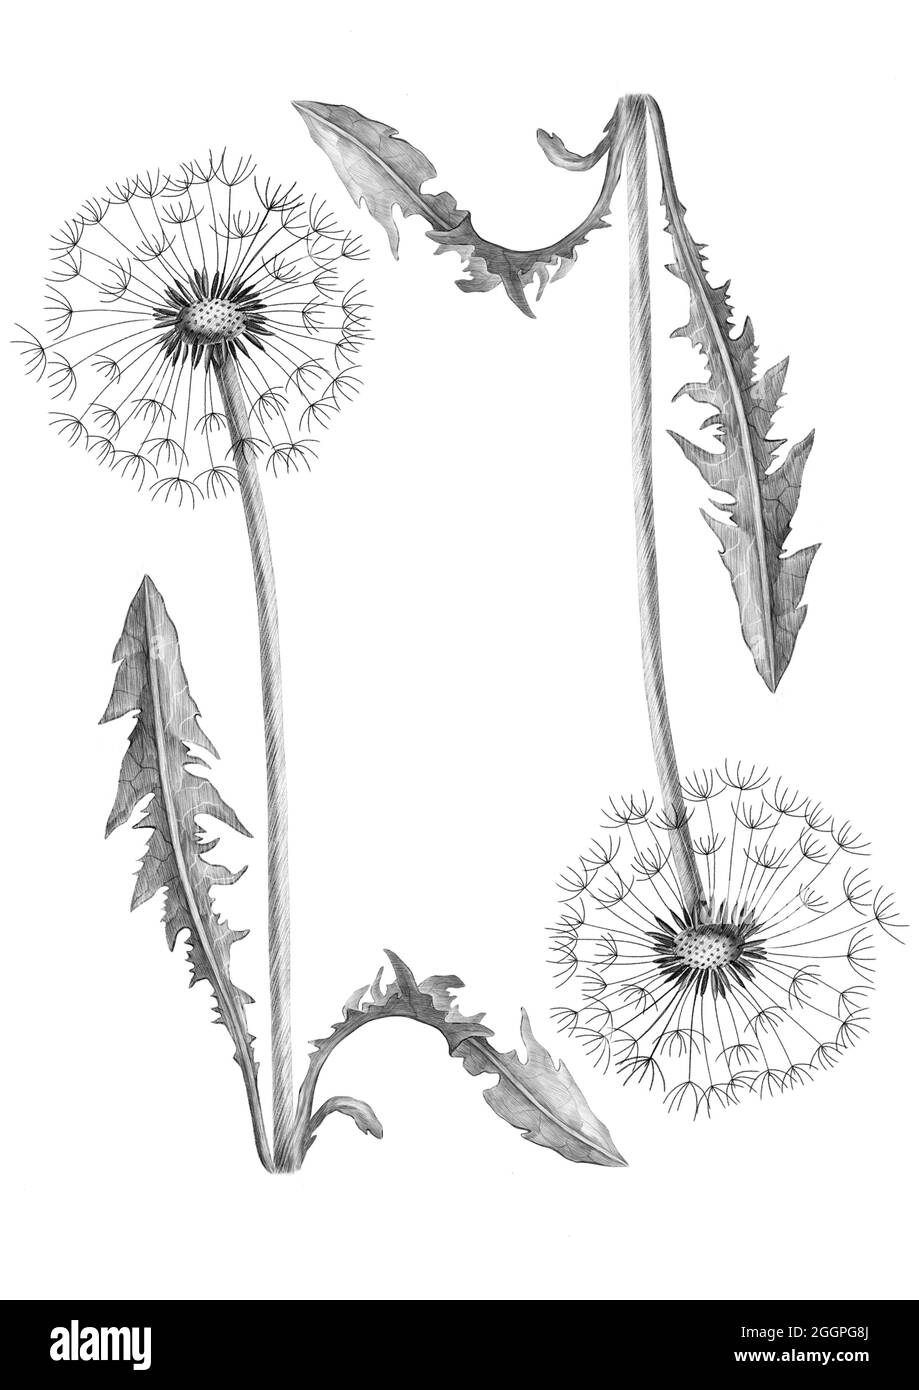 Dandelions on a white background. Pencil drawing illustration Stock